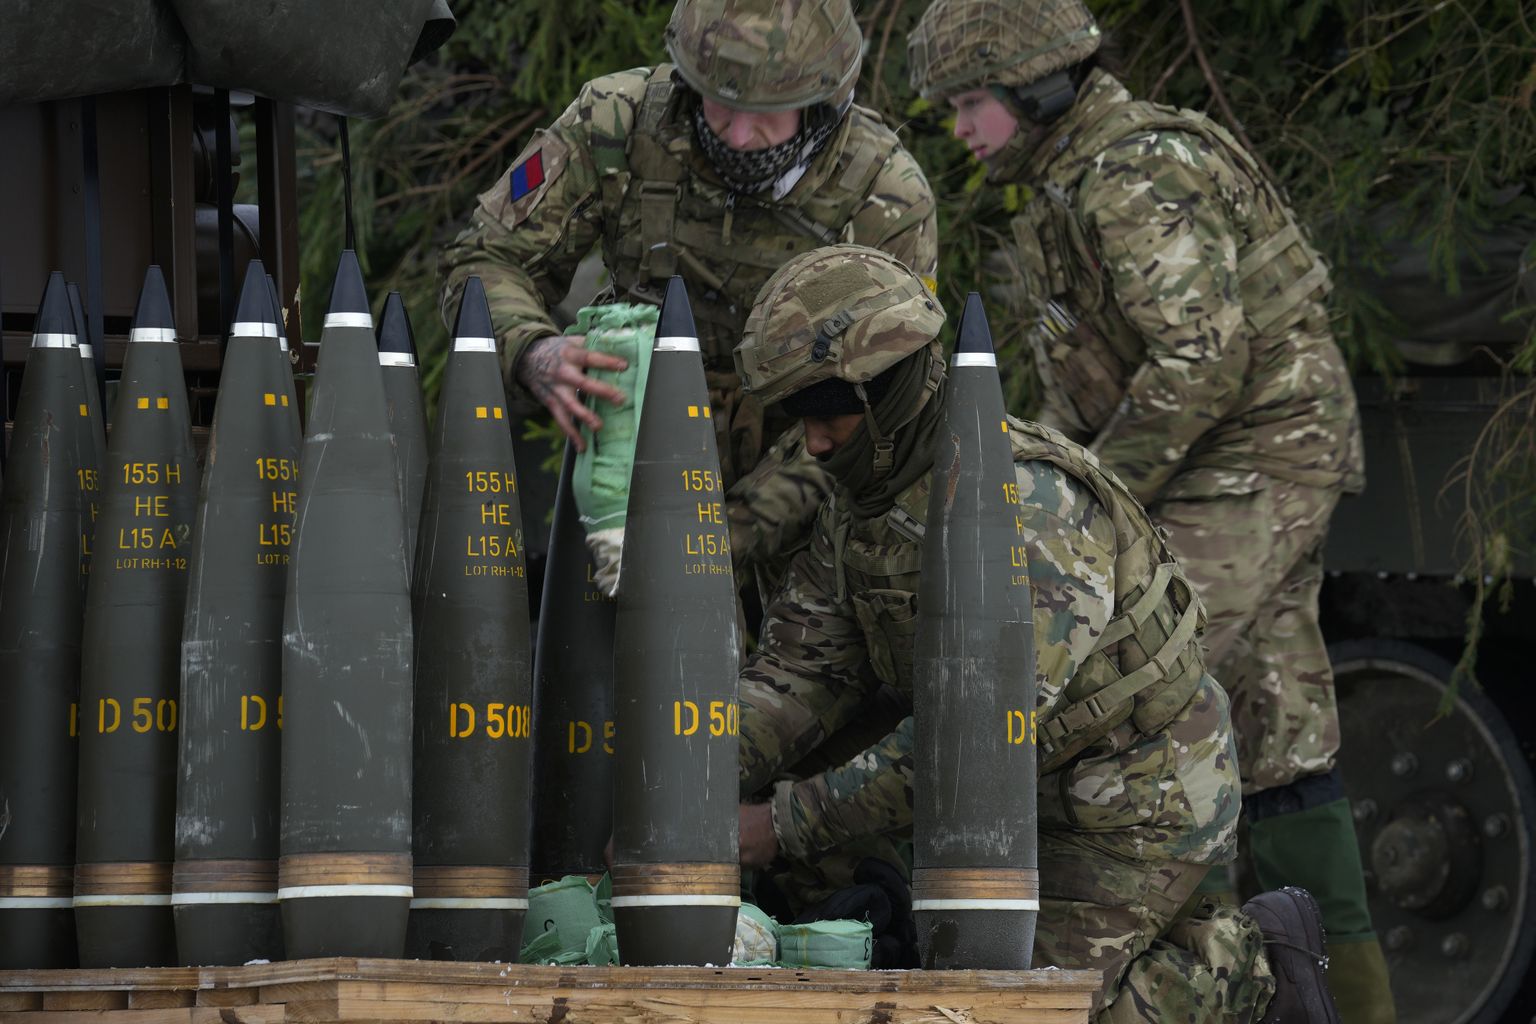 British soldiers prepare shells of AS-90 self-propelled artillery weapon during the Winter Camp 23 military drills near Tapa, Estonia, Tuesday, Feb. 7, 2023.